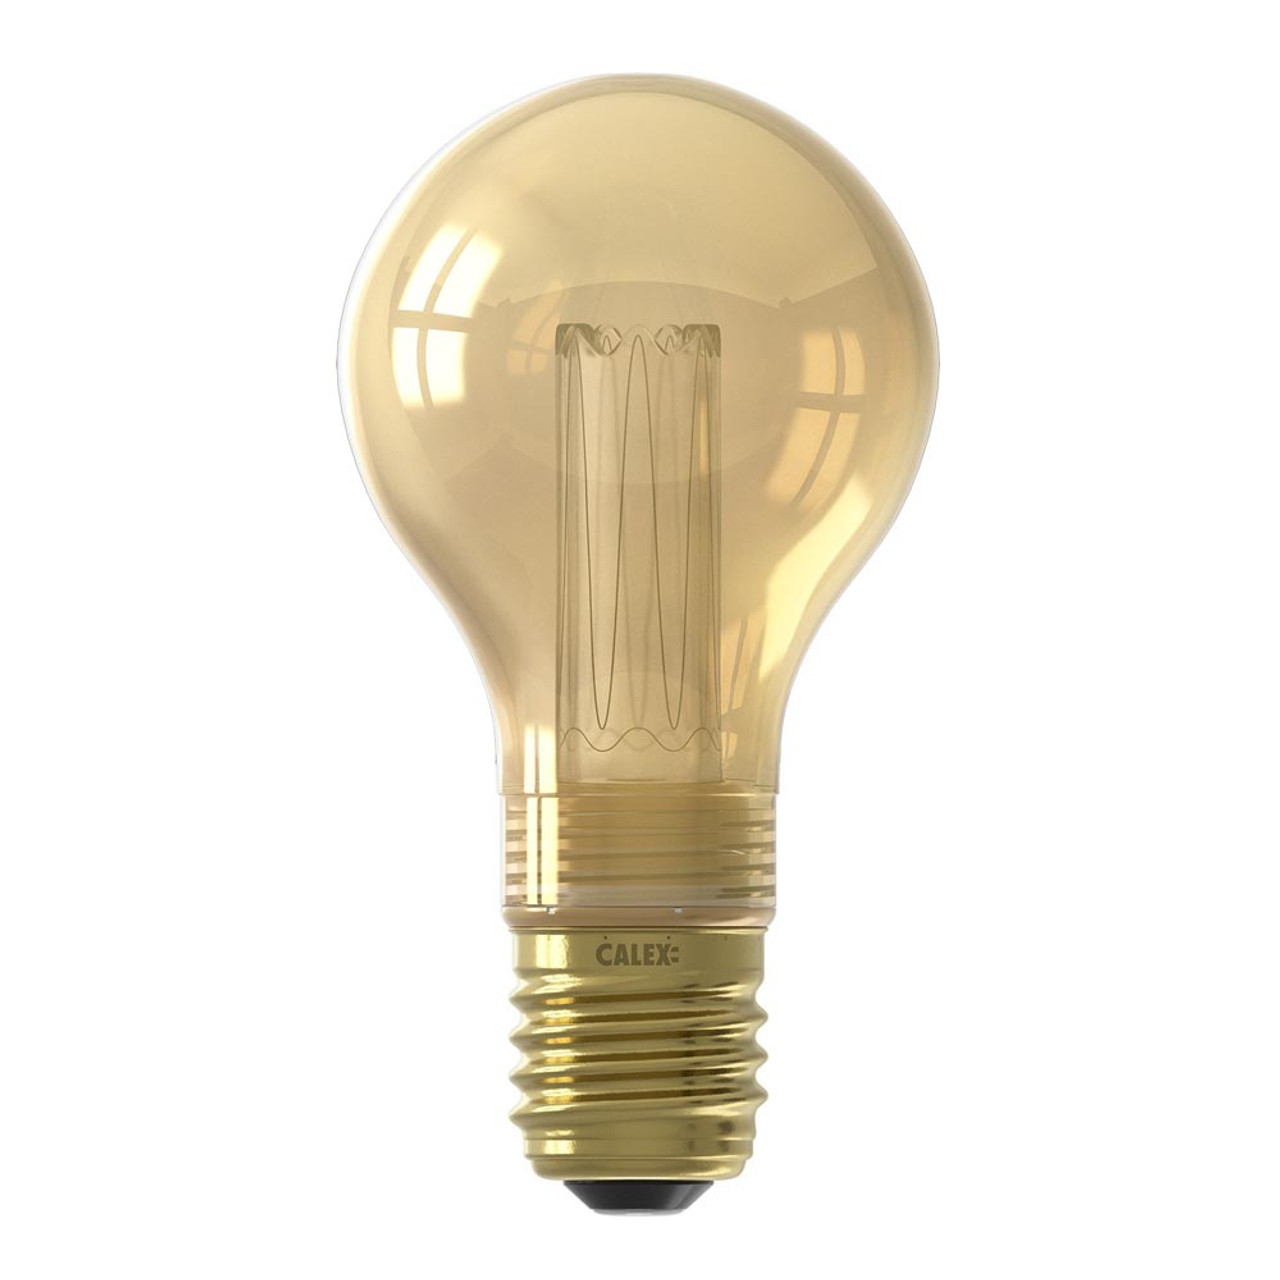 LED Glassfiber A60 GLS 2.3W ES Gold 1800K Dimmable Calex